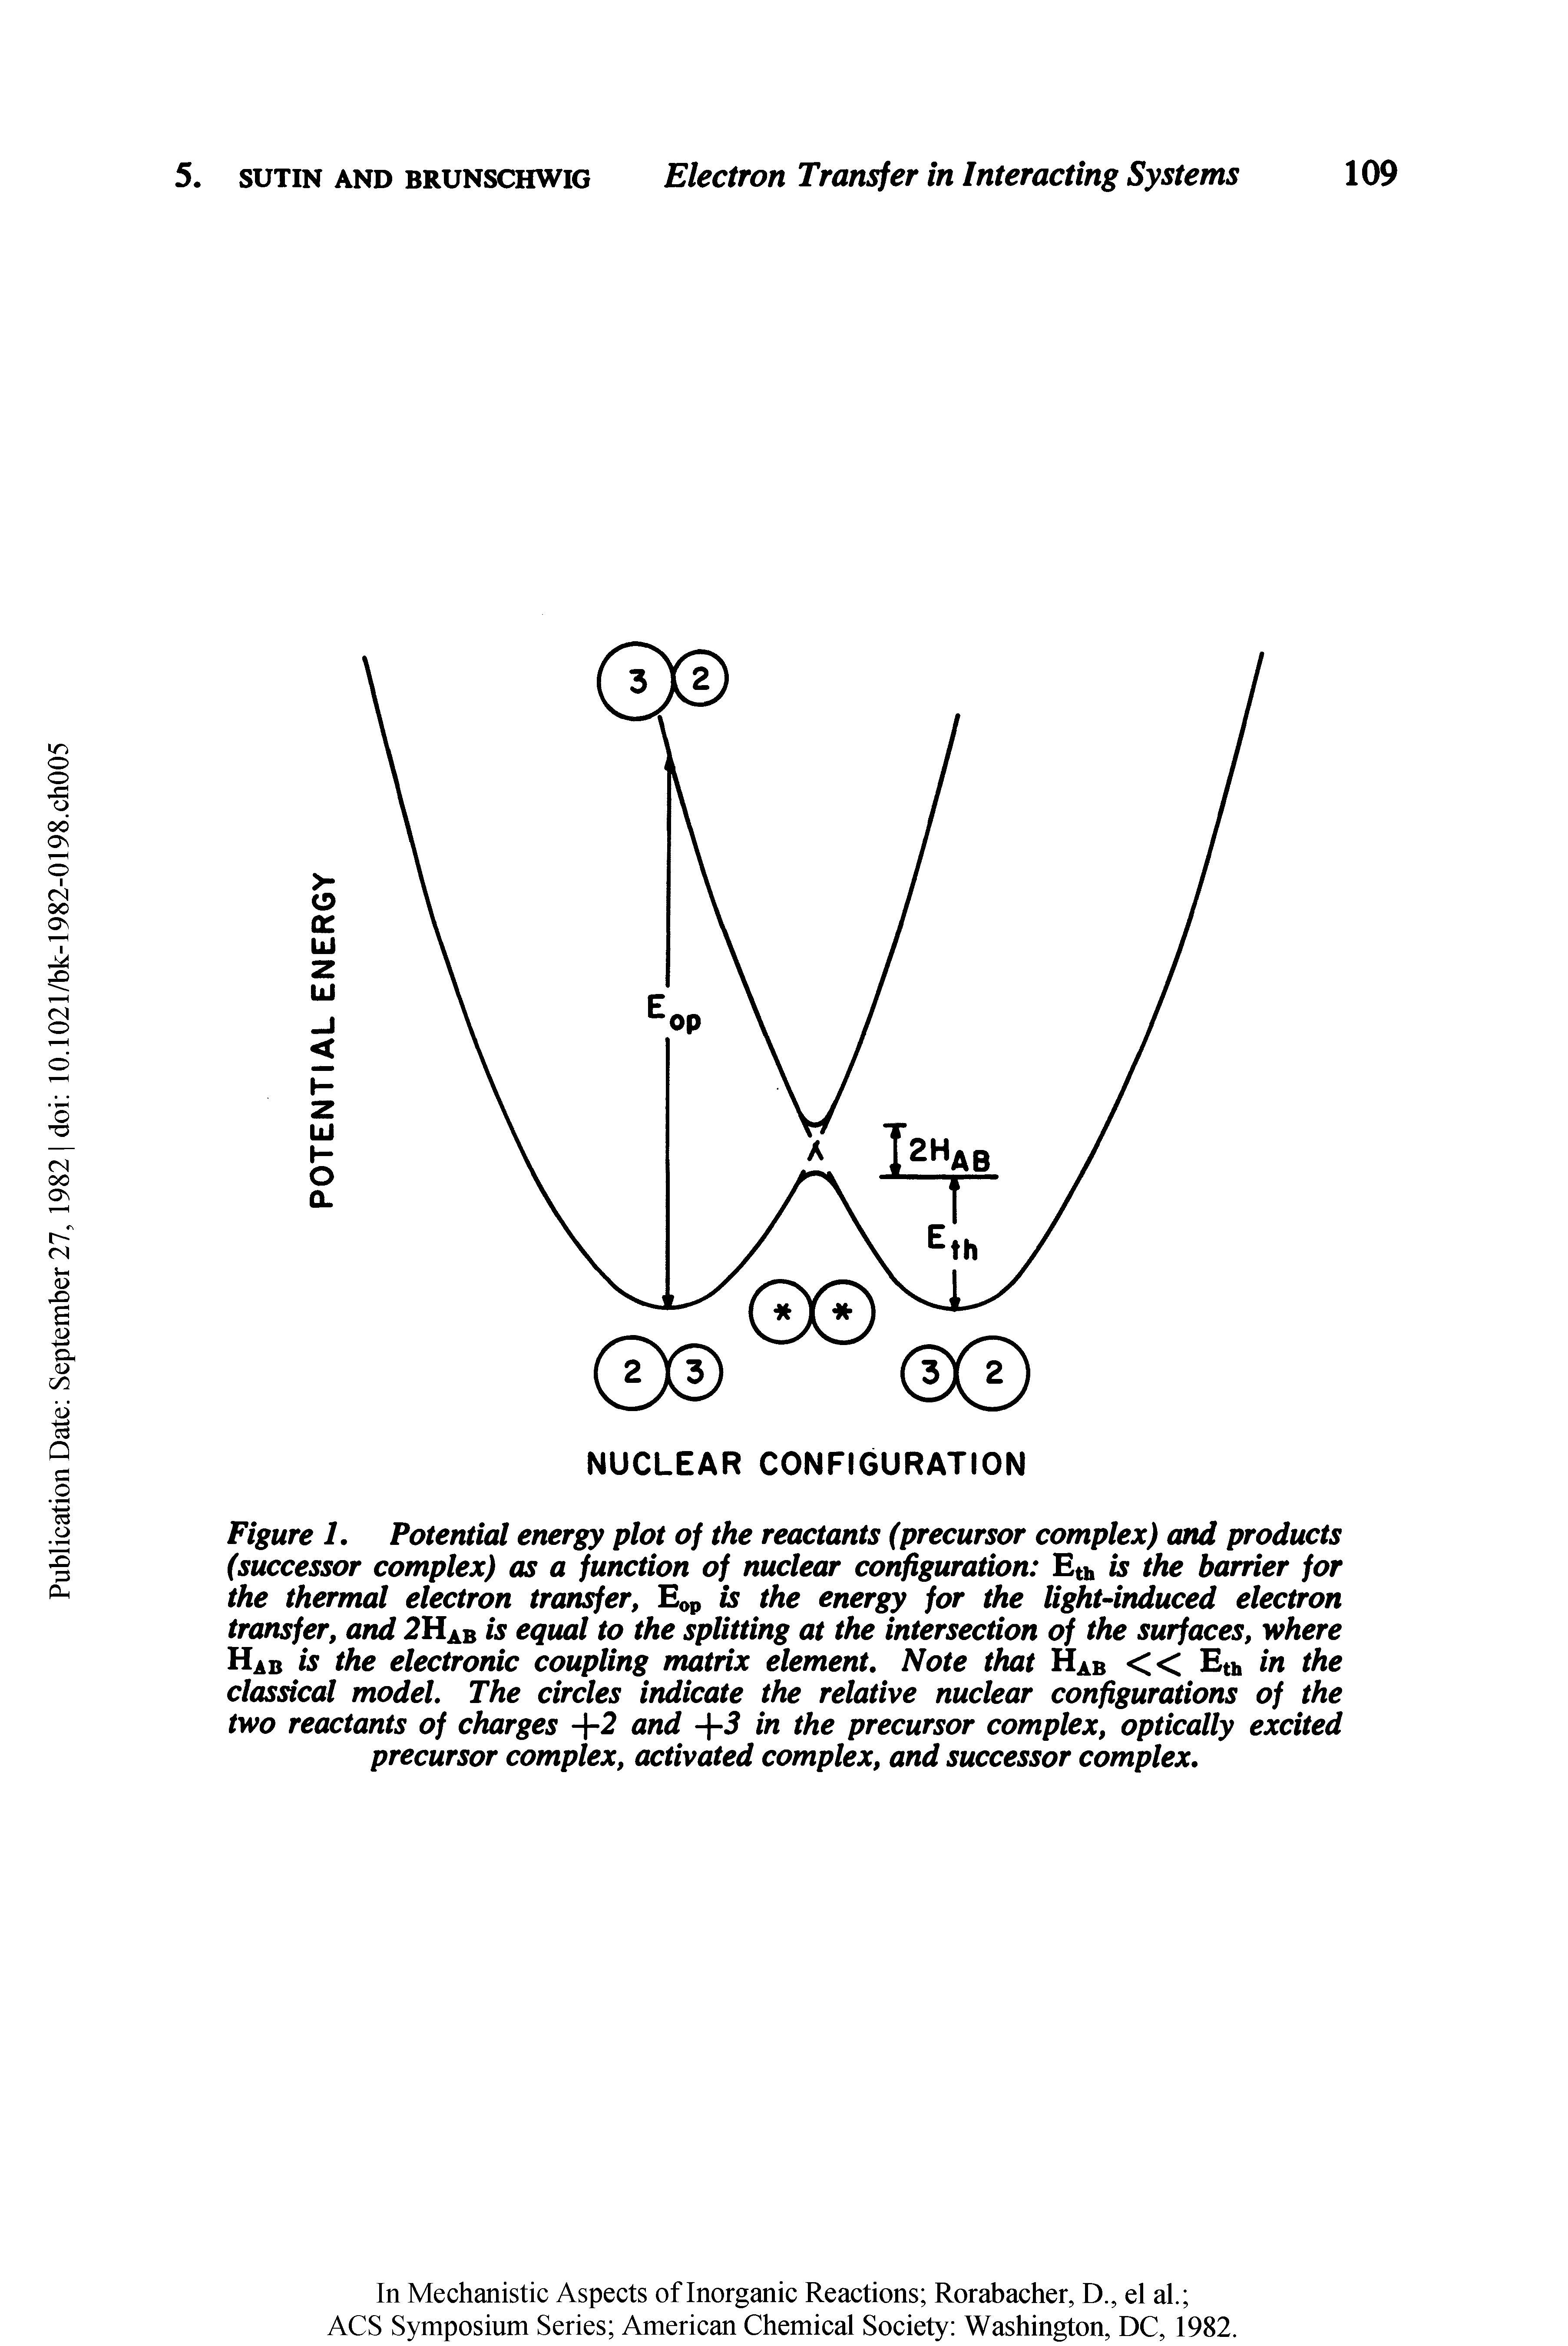 Figure 1. Potential energy plot of the reactants (precursor complex) and products (successor complex) as a function of nuclear configuration Eth is the barrier for the thermal electron transfer, Eop is the energy for the light-induced electron transfer, and 2HAB is equal to the splitting at the intersection of the surfaces, where HAB is the electronic coupling matrix element. Note that HAB << Eth in the classical model. The circles indicate the relative nuclear configurations of the two reactants of charges +2 and +5 in the precursor complex, optically excited precursor complex, activated complex, and successor complex.